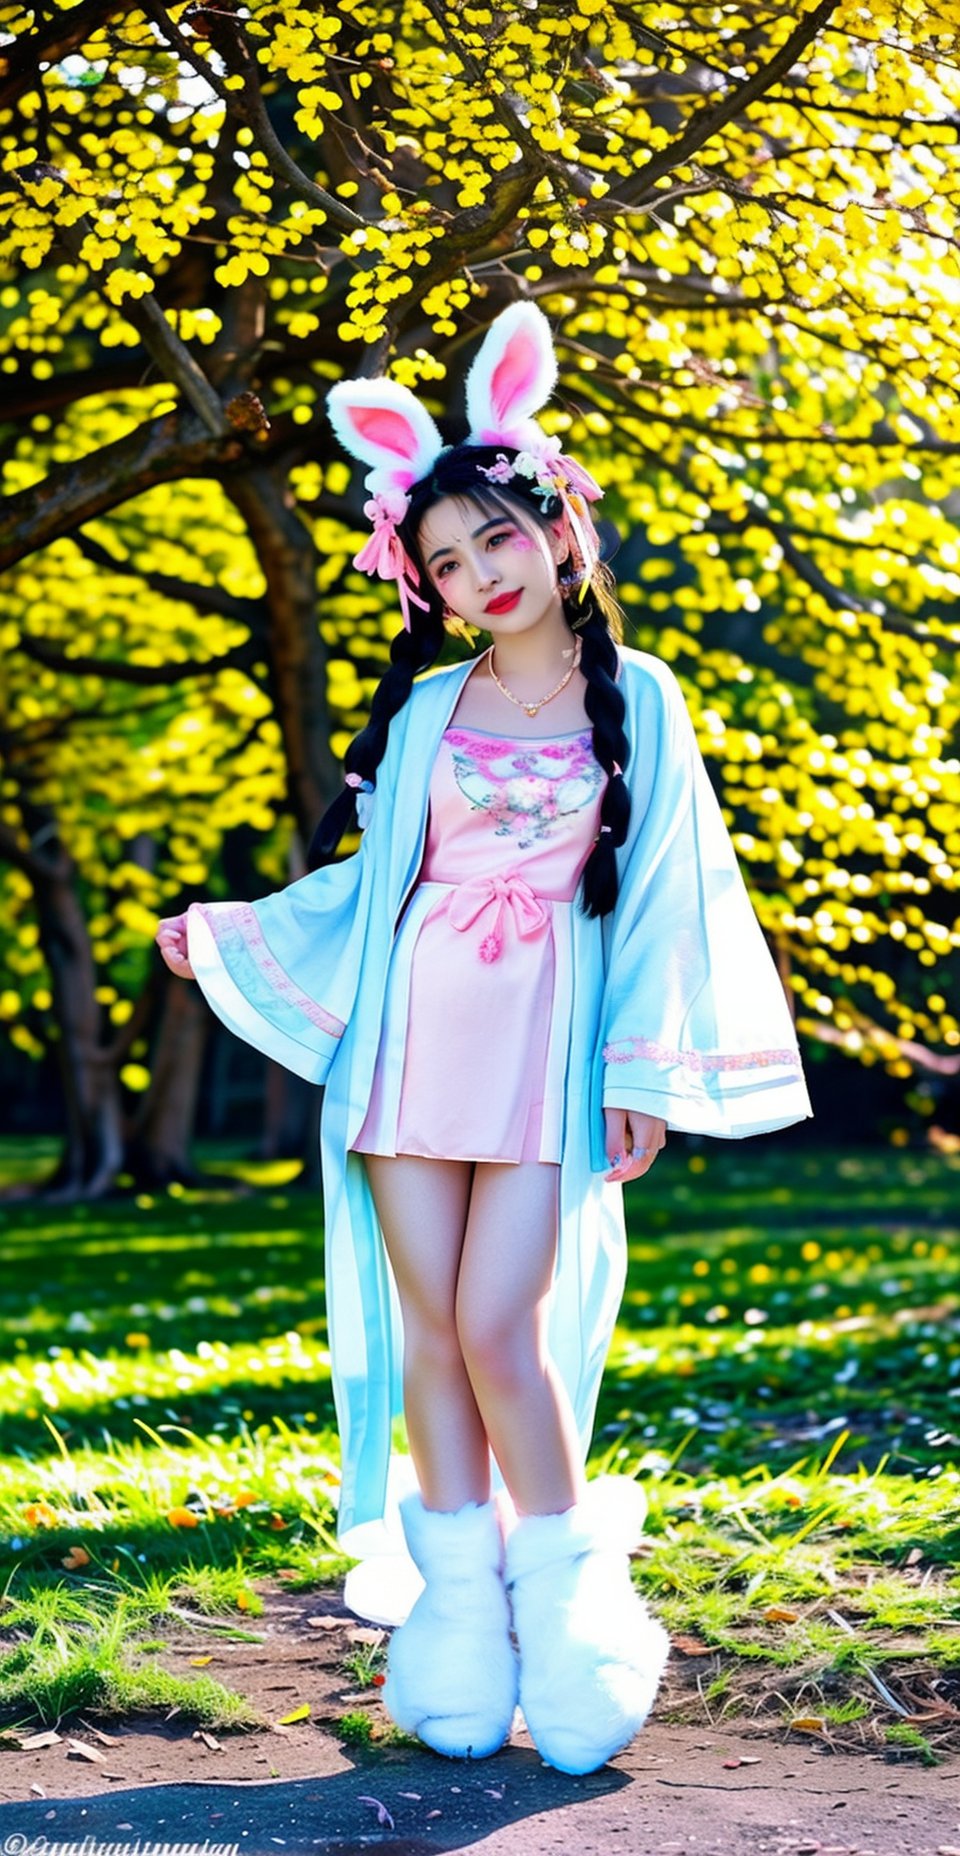 (full body),(from front:1.2),photo of (a 18 year-old cute Chinese woman:1.2) wearing Detailed embroidered (see-through) (Hanfu:1.2) from r/nakedhanfu,(best aesthetic:1.2) and (best quality:1.2) and (photorealistic:1.4) and (Realistic:1.4) and Detailed Skin Textures and detailed skin pores and high skin detail,poes,see-through long sleeves and see-through wide sleeves,(standing and legs spread),<lora:naked hanfuV1:0.7>, <lora:LCM_LoRA_Weights_SD15加速器:0.7>,hair bun and single braid,(Detailed facial features),Look at the audience and Seducing the audience and smiling,makeup,red lips,(looking at viewer and facing viewer) (wearing Detailed hair ornament and Detailed beads,Detailed hair flower,wearing Detailed jewelry,earrings,necklace,(facial mark:1.2),(forehead mark:1.2),(animal ears, fake bunny ears),hair ribbon,flowers,Sexy thighs are visible,legs,wearing chinese shoes,<lyco:film grainV3:0.4>  <lora:detail_slider_v4-增加細節:1>,<lora:增加真實感epiCRealLife:1> Park background, forest, natural light, sunlight